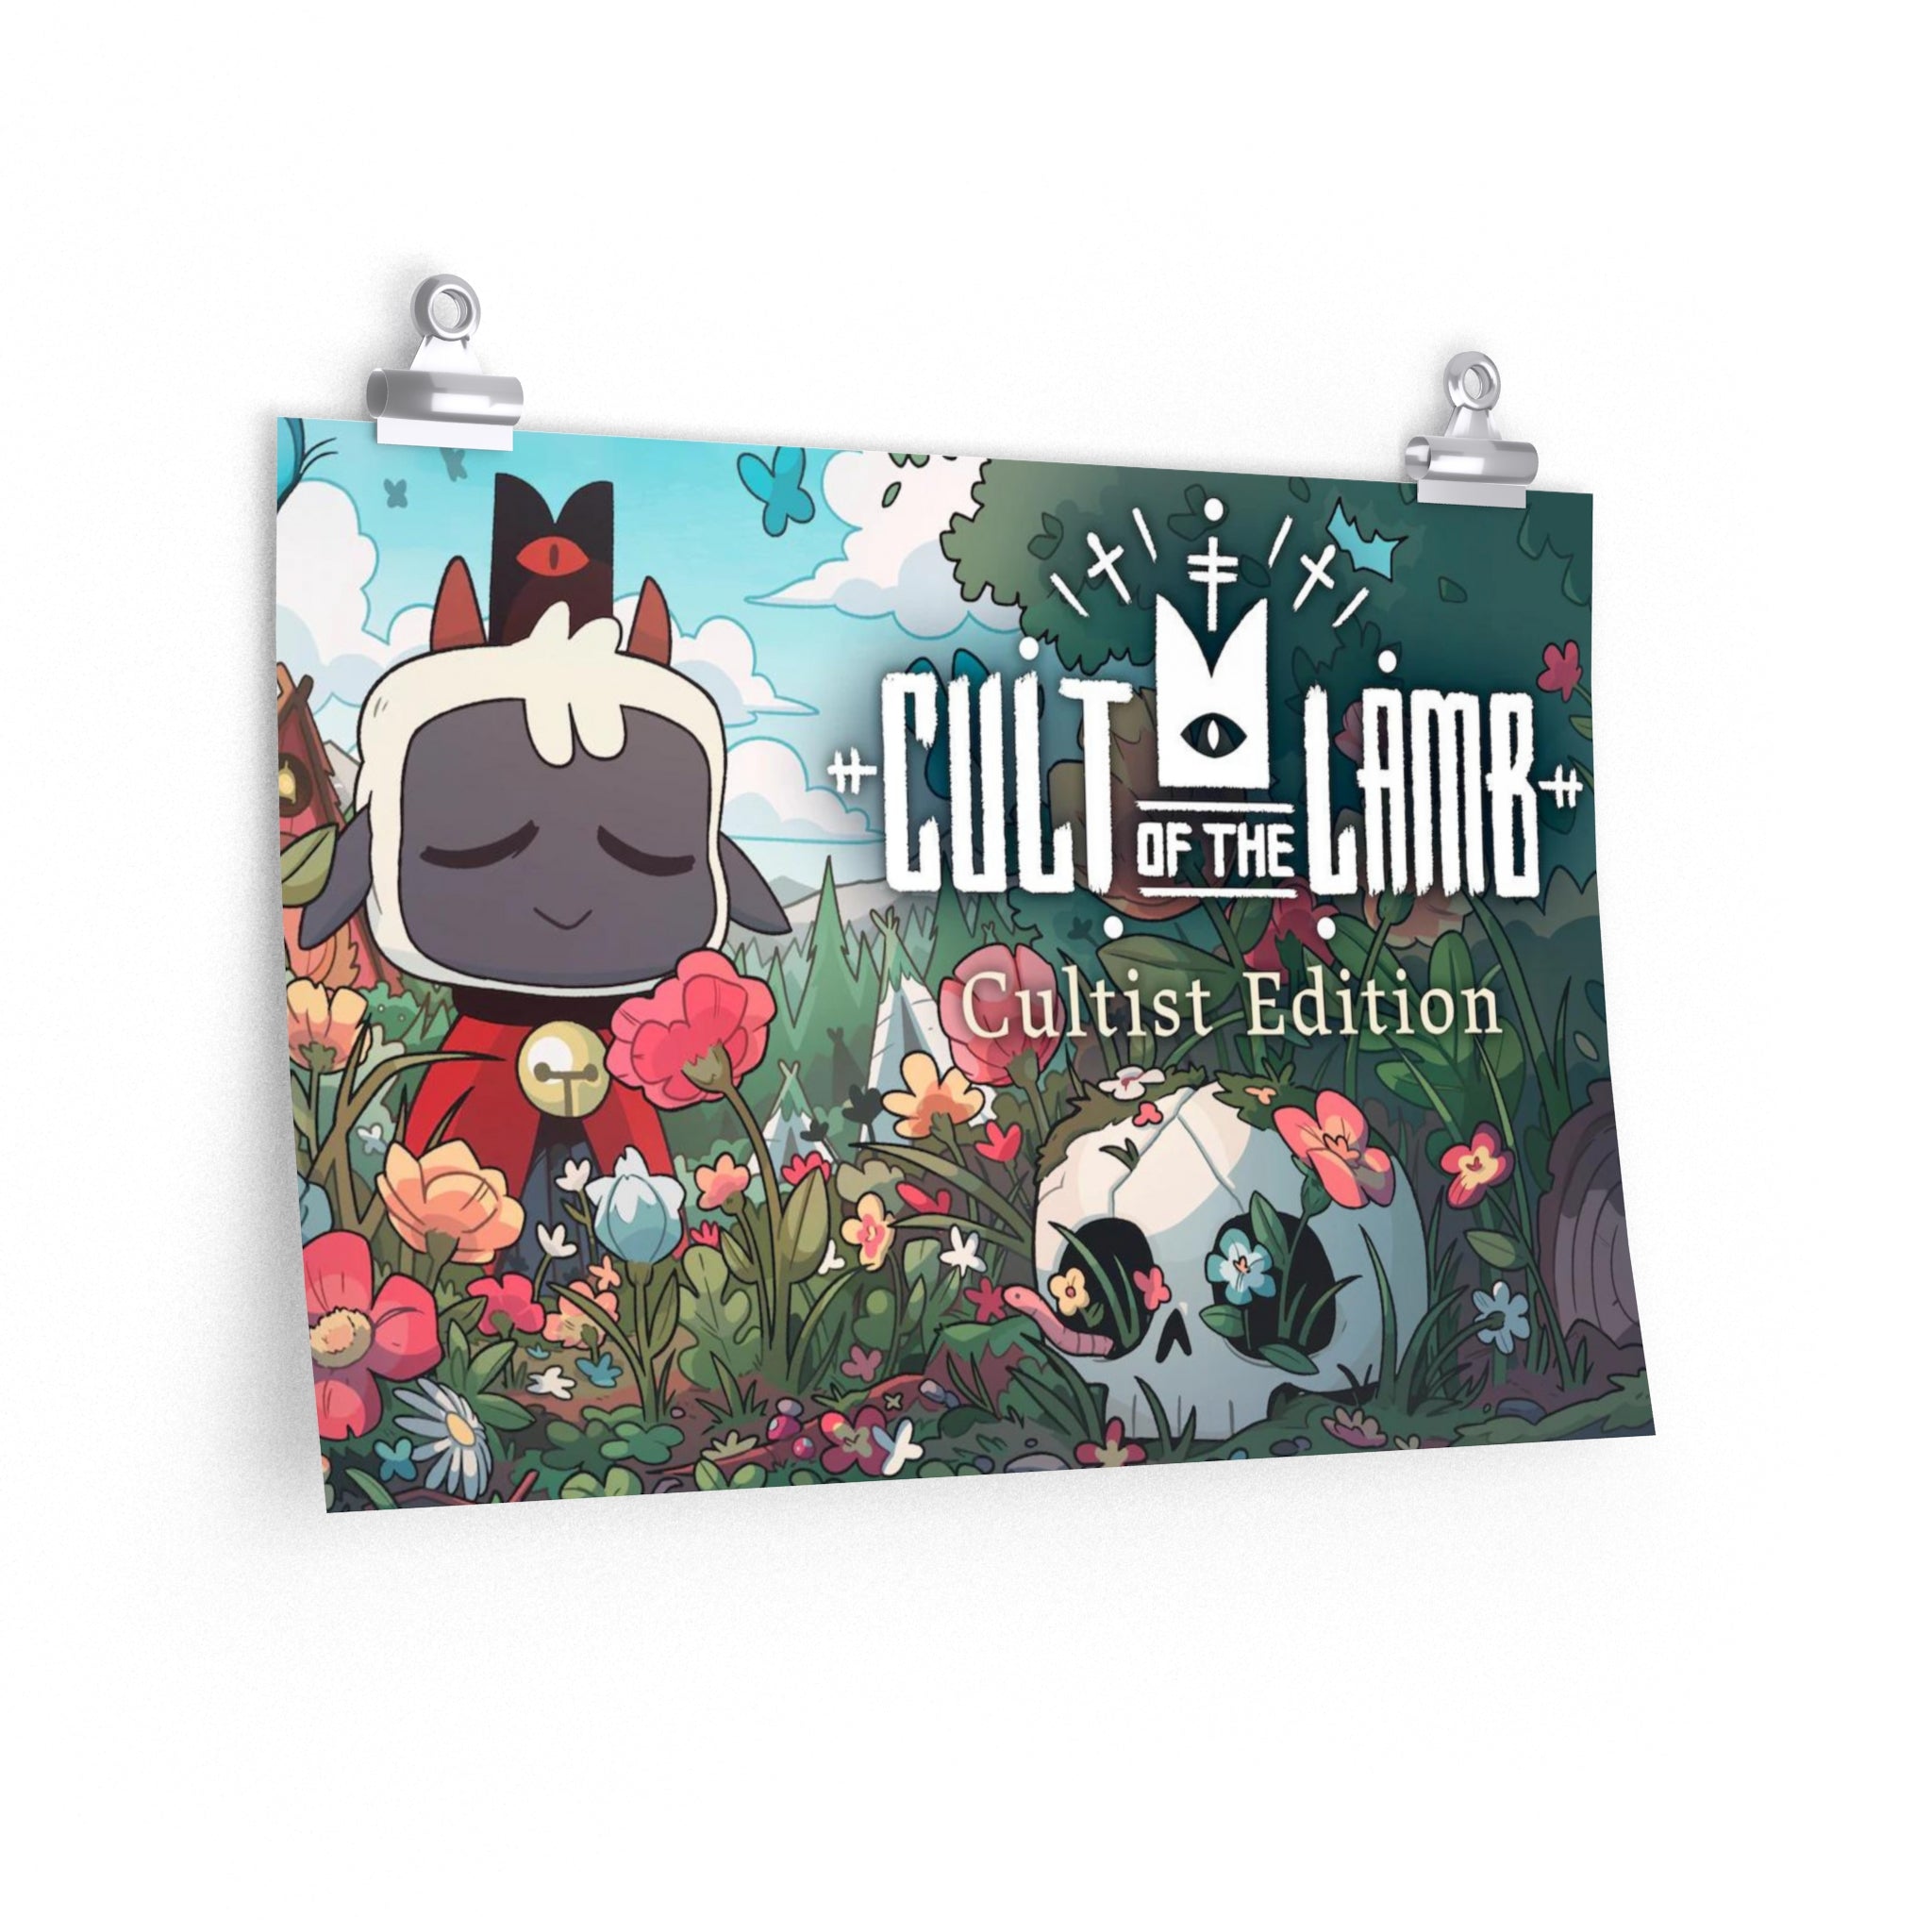 Buy Cult of the Lamb: Cultist Edition